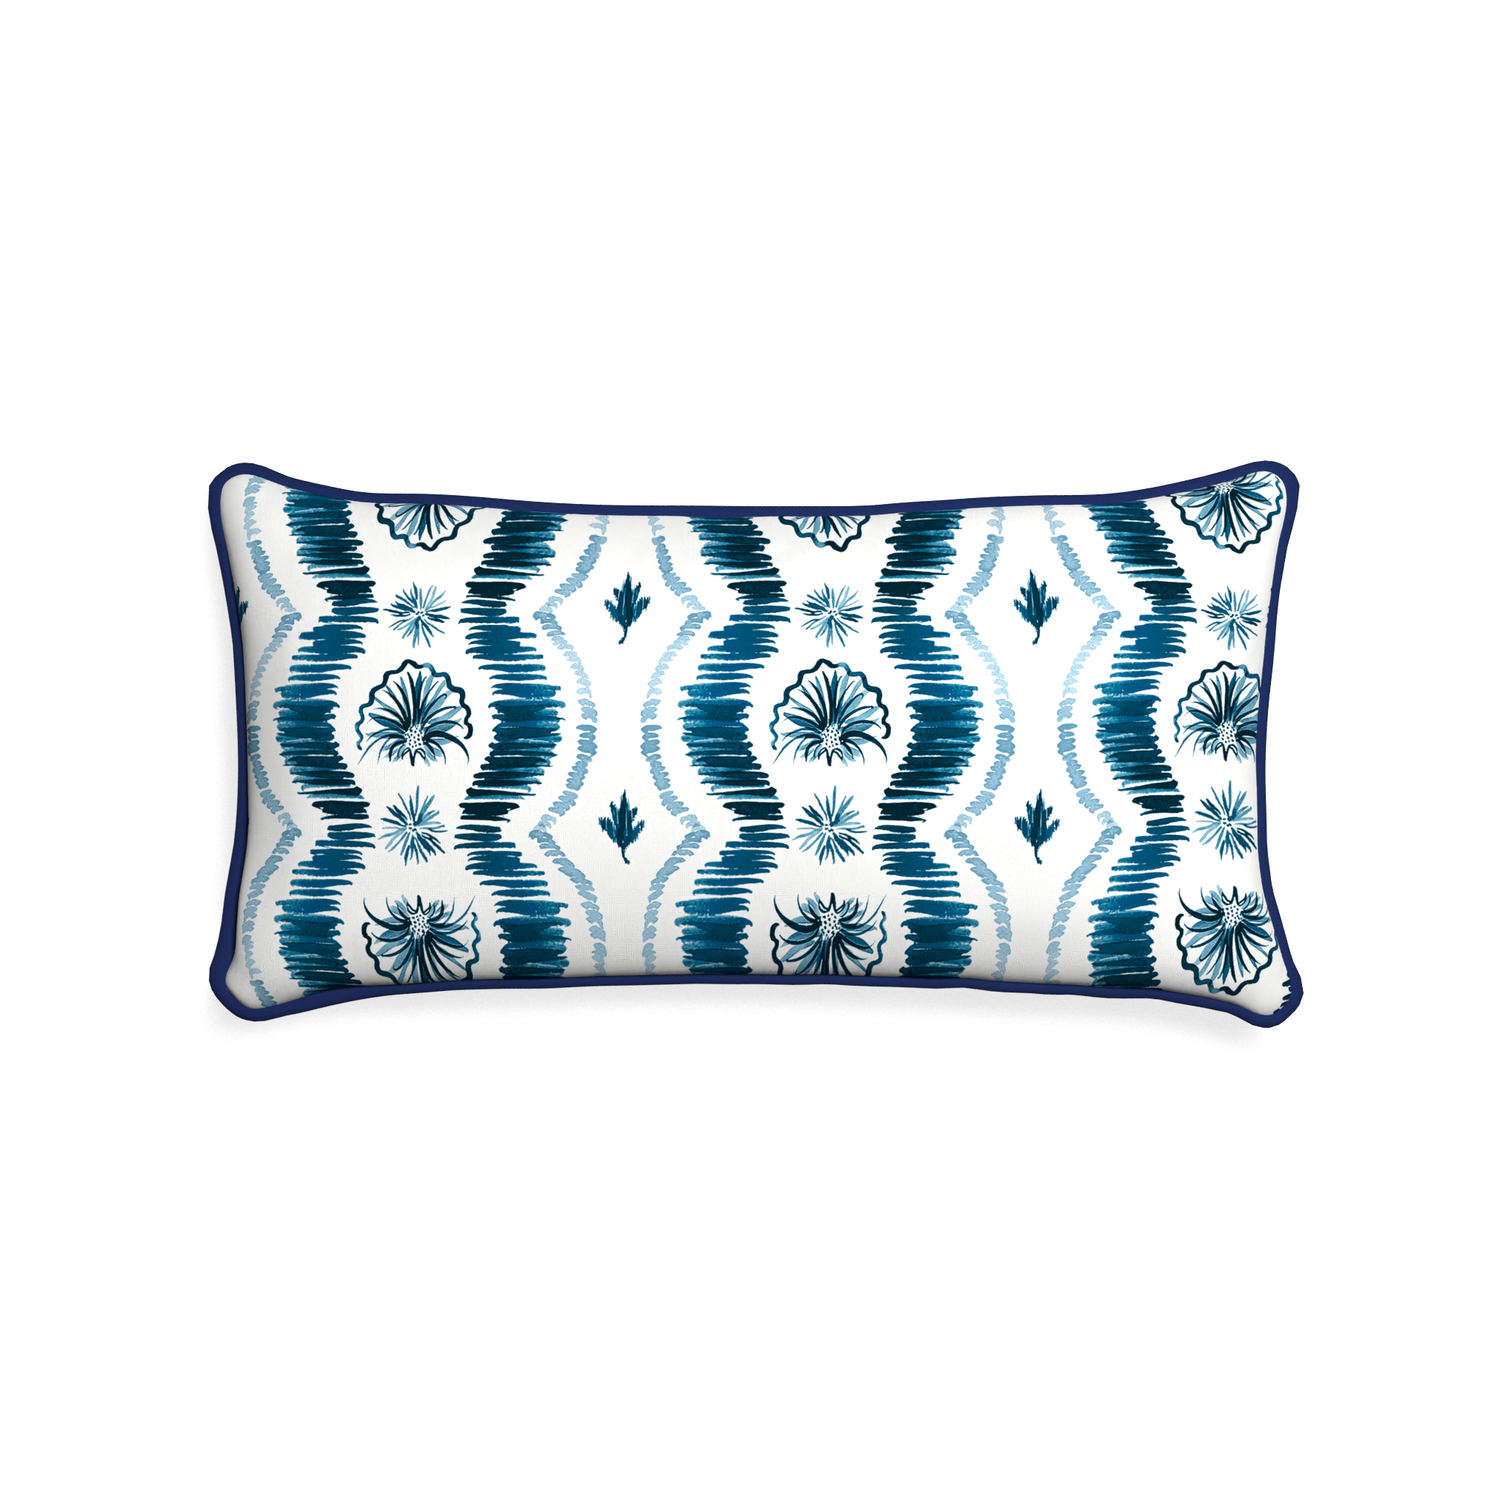 Midi-lumbar alice custom blue ikatpillow with midnight piping on white background